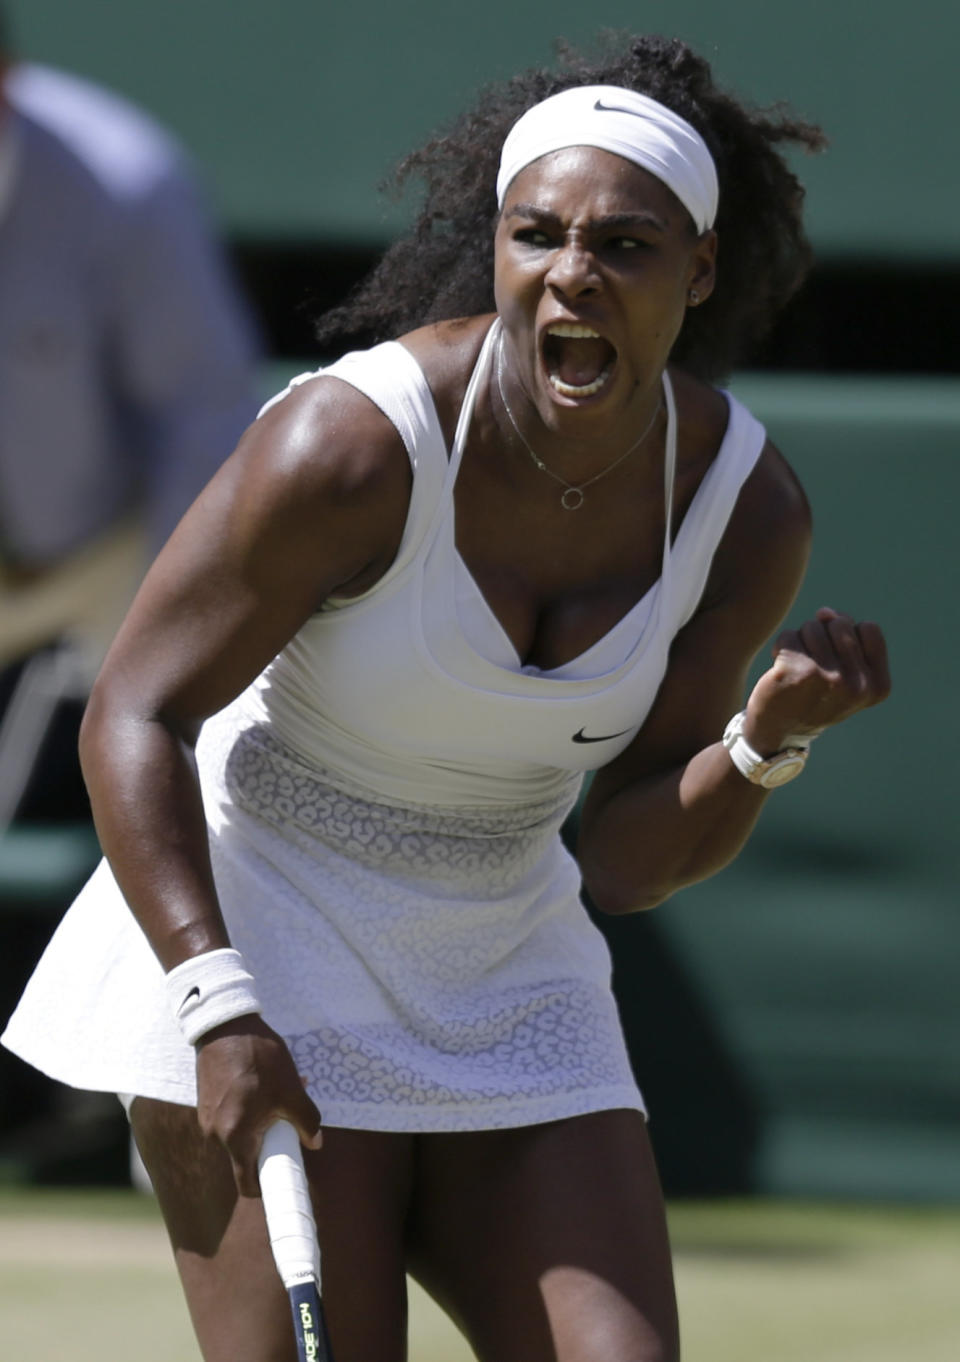 Serena Williams of the United States celebrates winning a point against Garbine Muguruza of Spain during the women's singles final at the All England Lawn Tennis Championships in Wimbledon, London, Saturday July 11, 2015. (AP Photo/Pavel Golovkin)